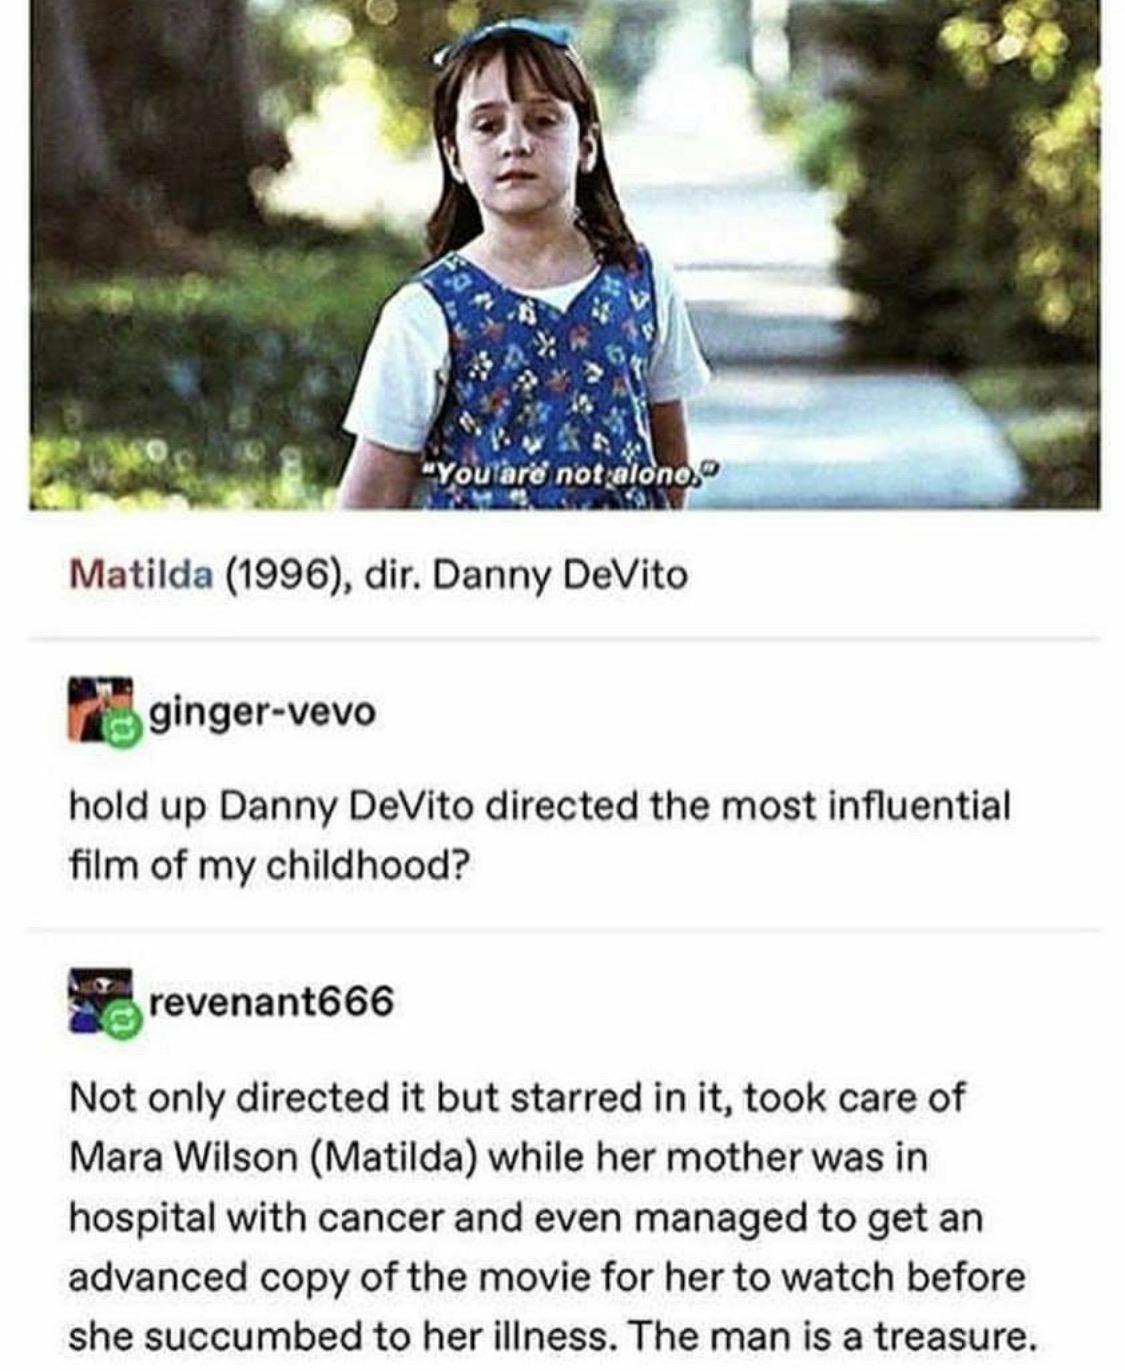 danny devito matilda facts - "You are not alono, Matilda 1996, dir. Danny DeVito gingervevo hold up Danny DeVito directed the most influential film of my childhood? revenant666 Not only directed it but starred in it, took care of Mara Wilson Matilda while